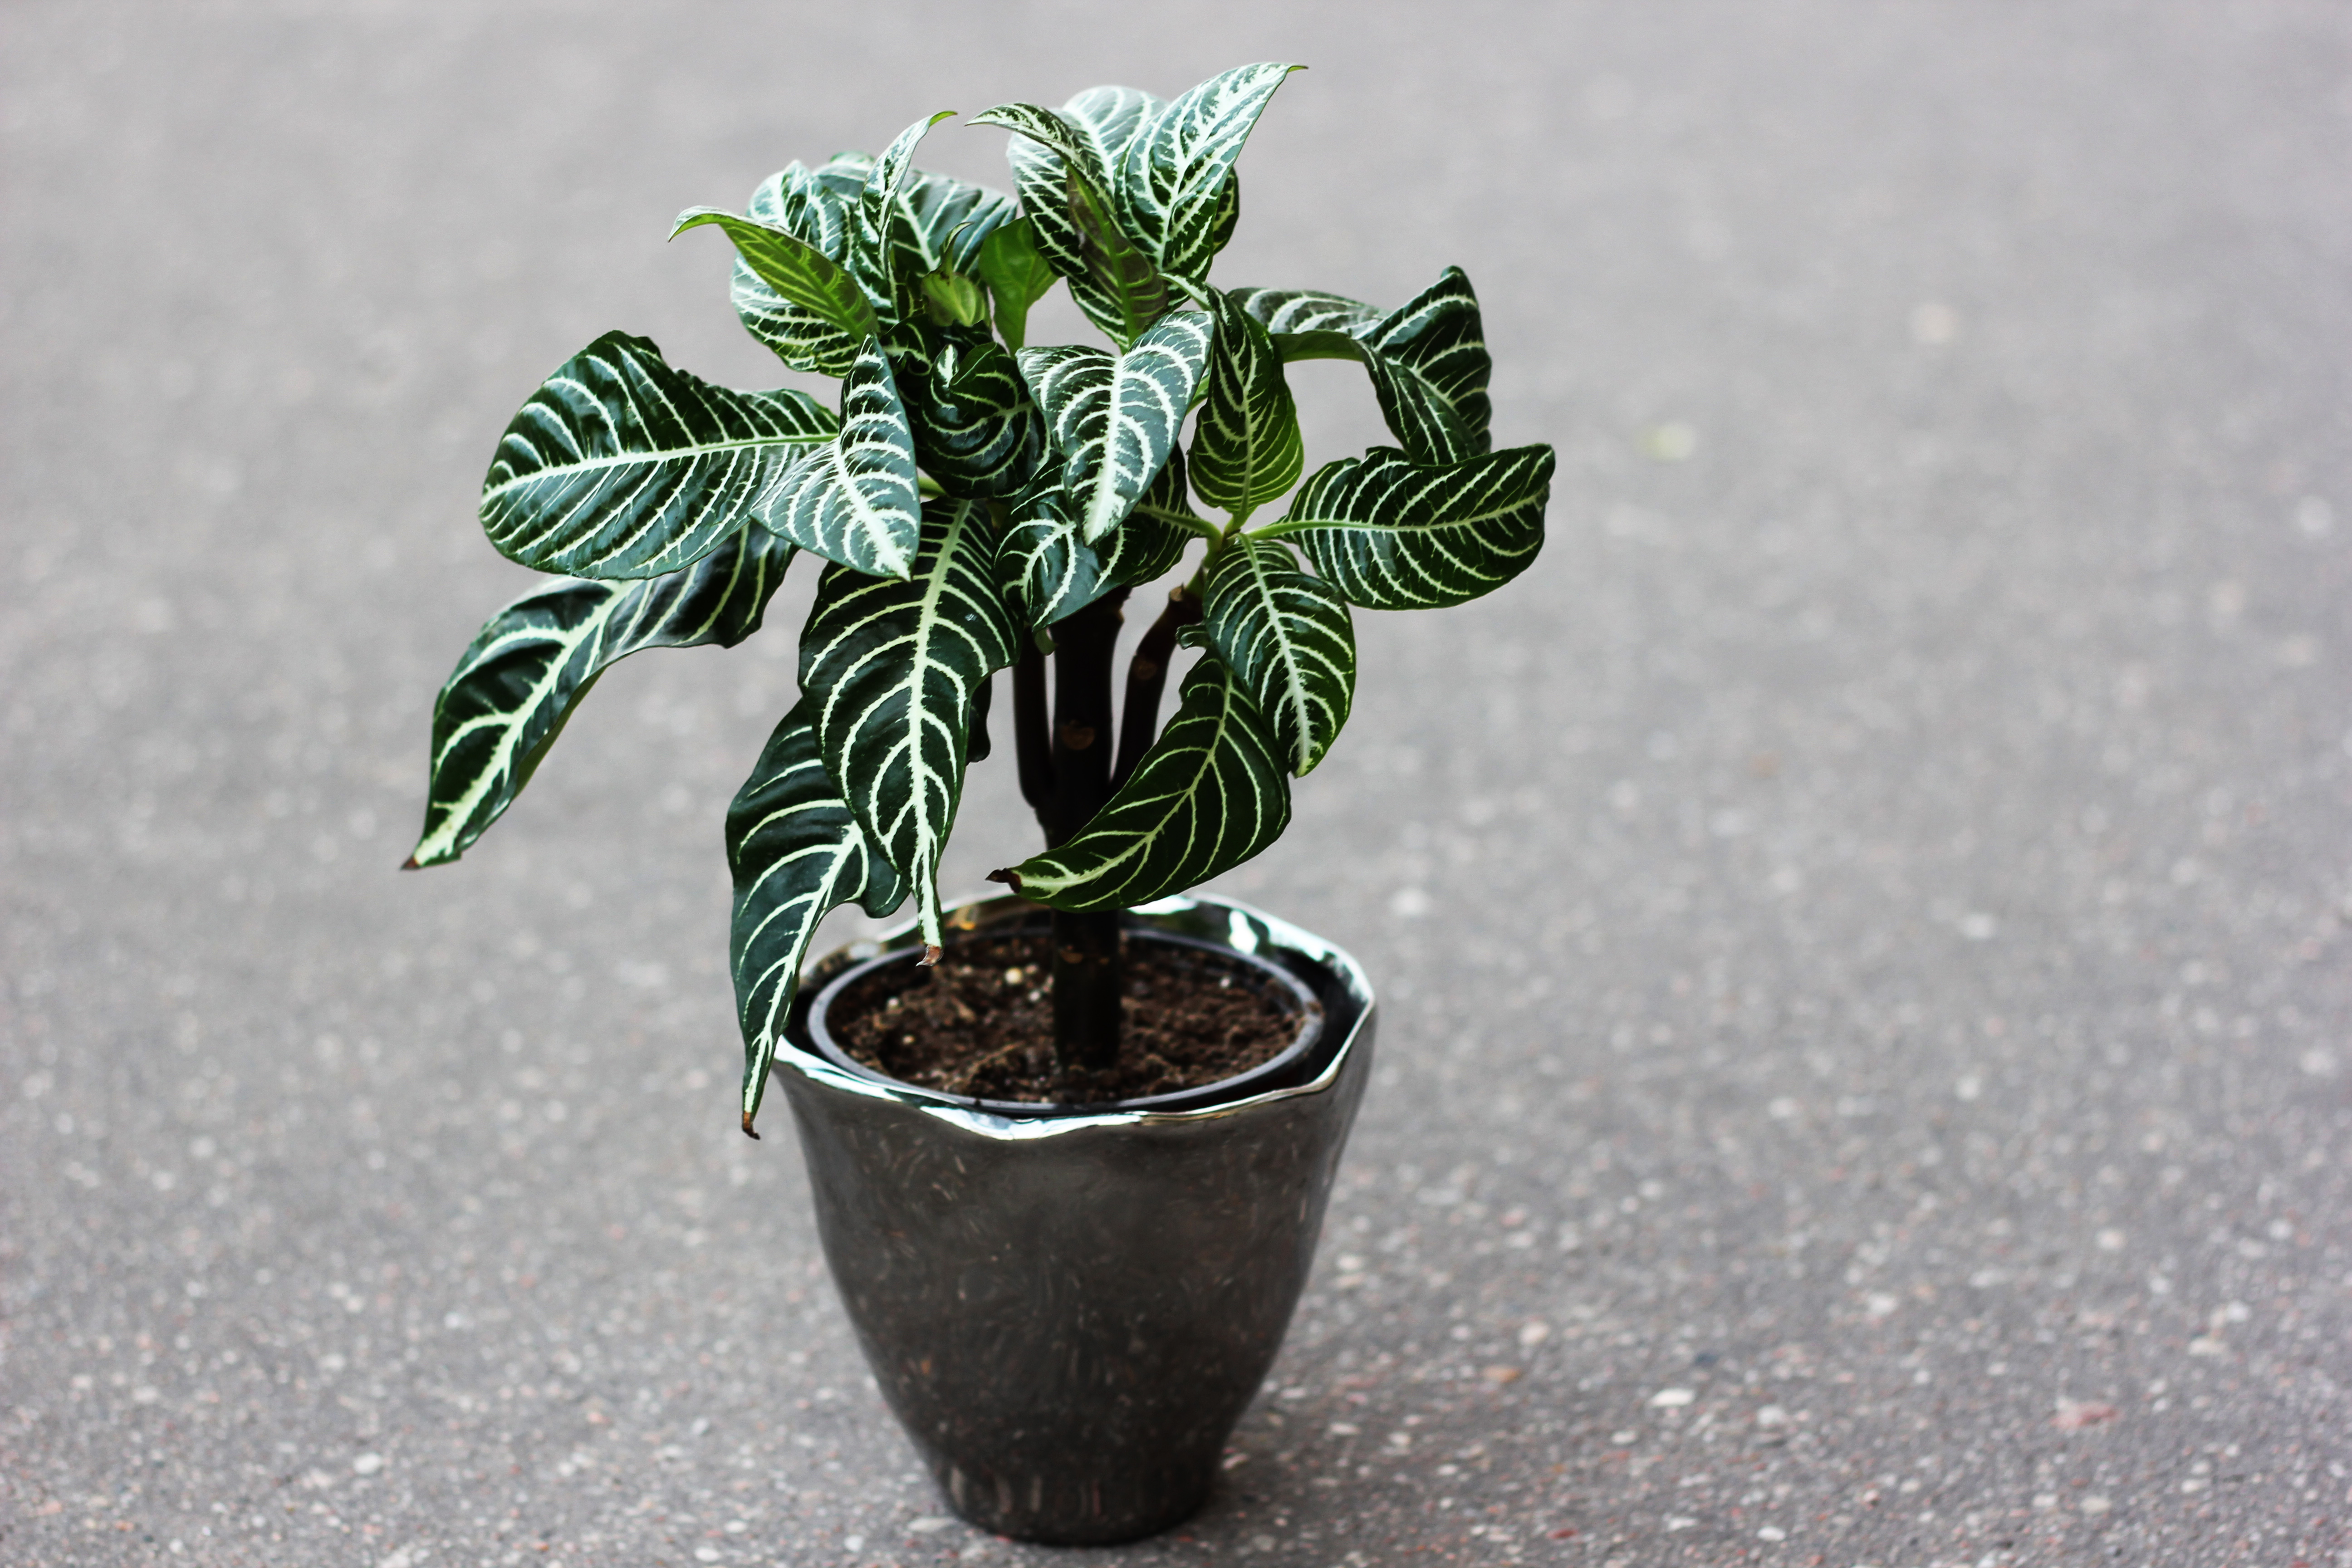 The best way to repot your Zebra Plant